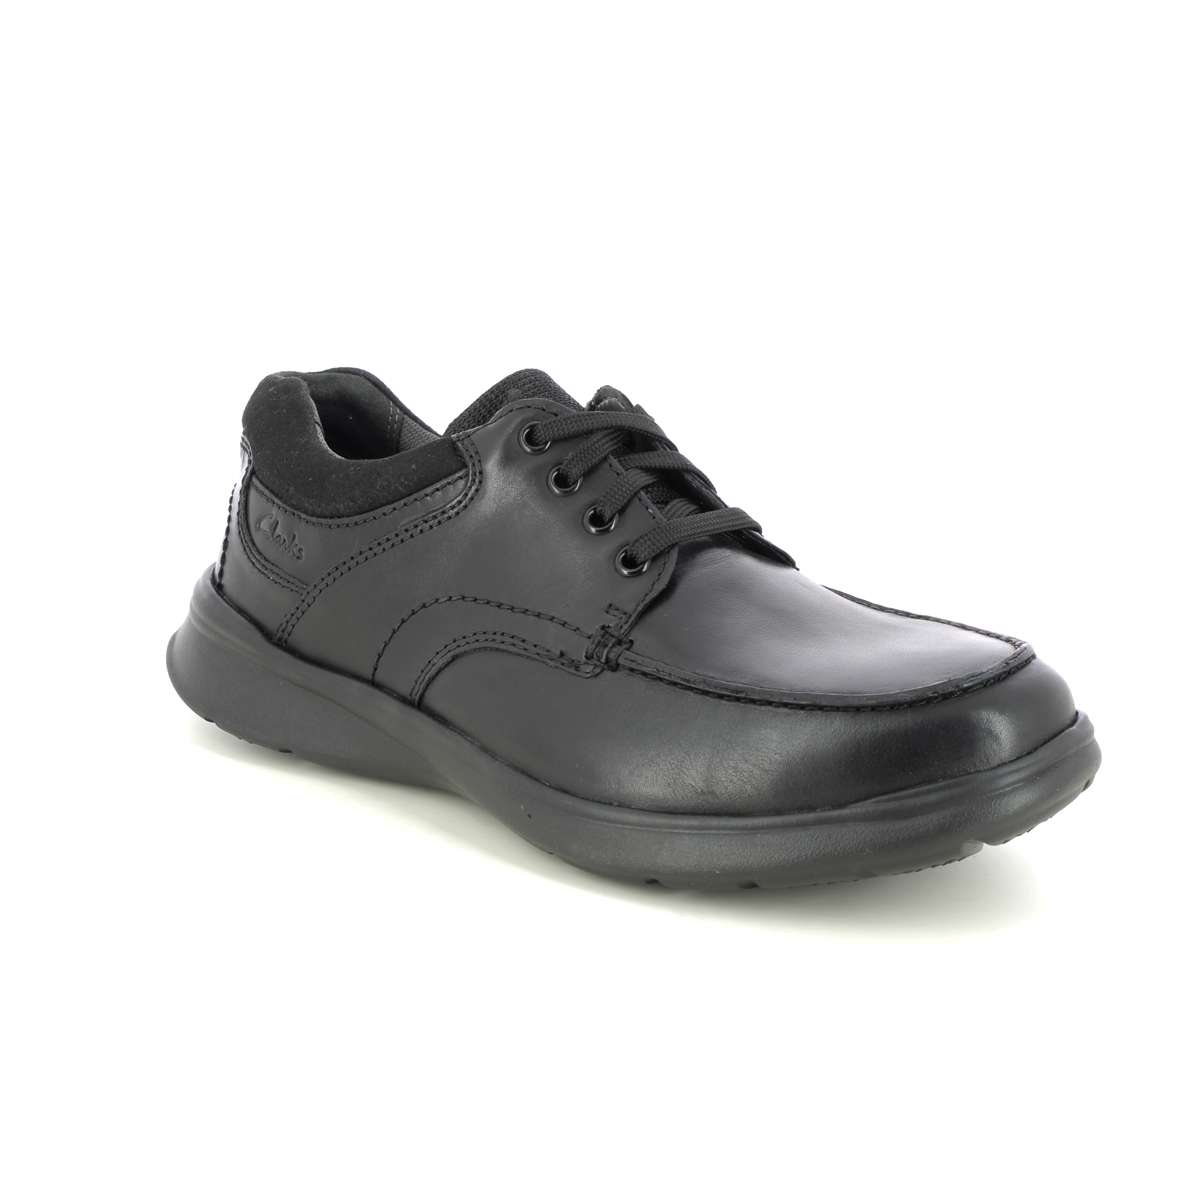 Clarks Cotrell Edge Black Leather Mens Comfort Shoes 3738-58H In Size 6 In Plain Black Leather H Width Fitting Extra Wide